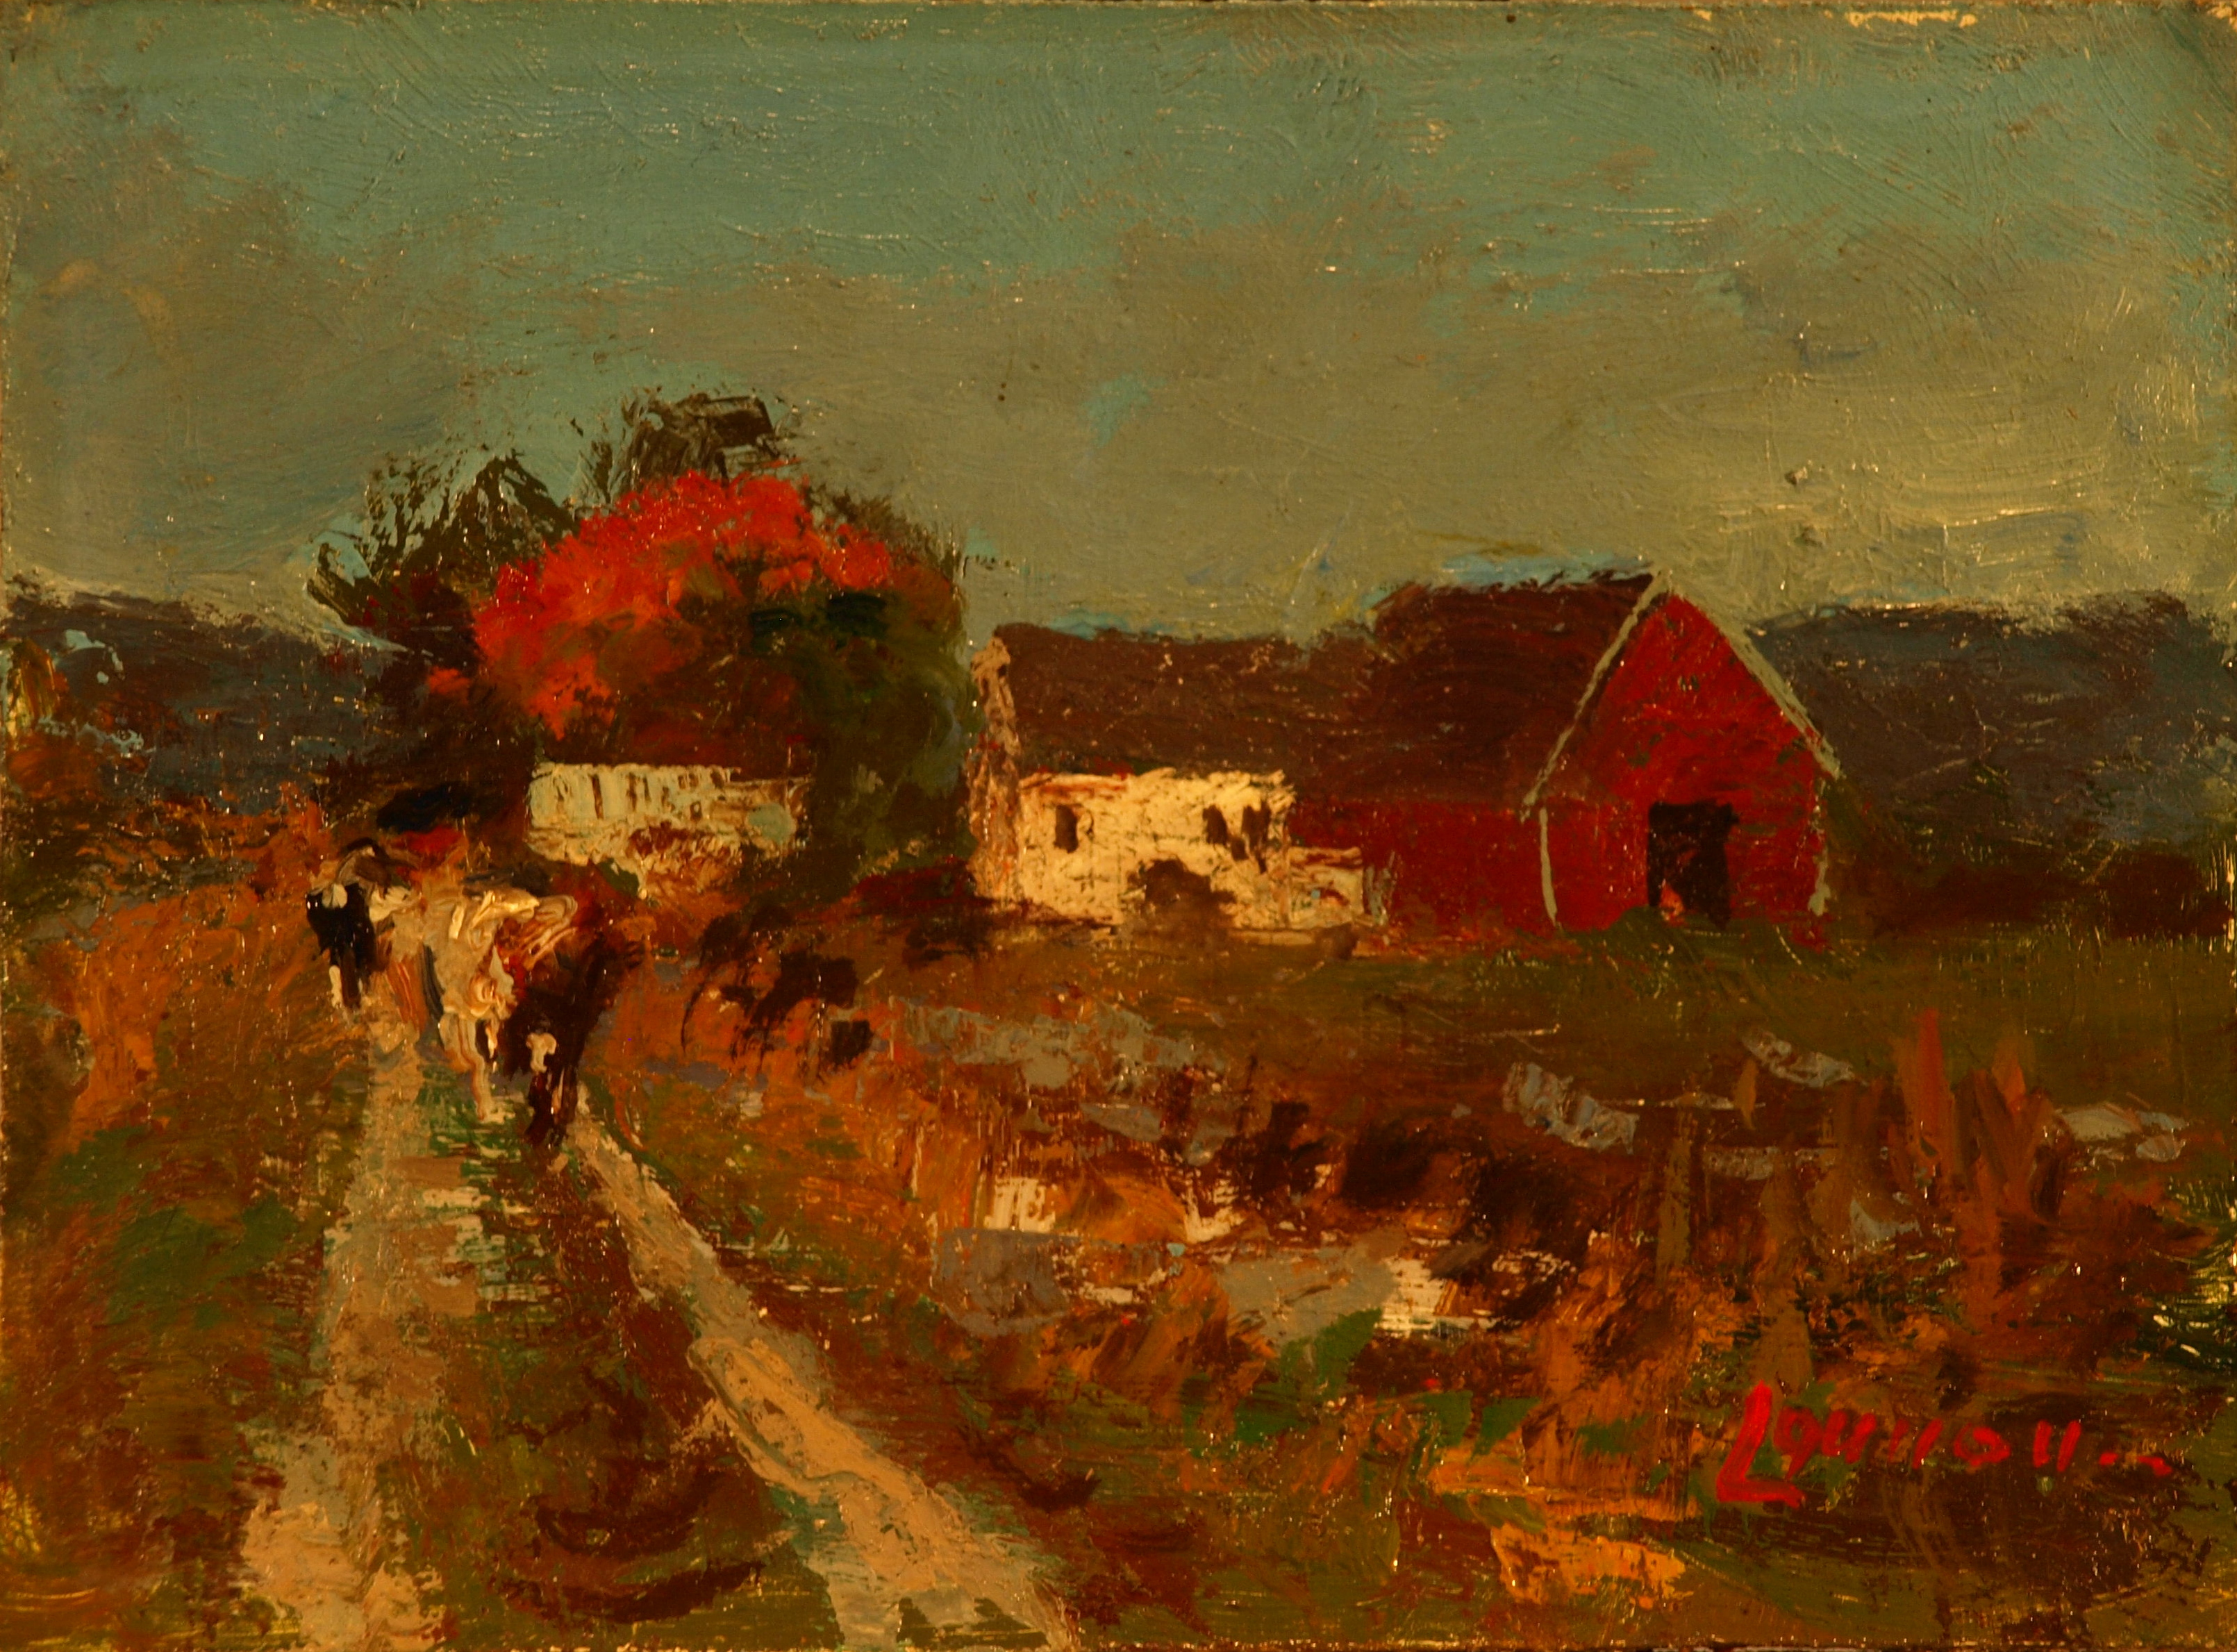 Going to Pasture, Oil on Panel, 6 x 8 Inches, by Bernard Lennon, $175